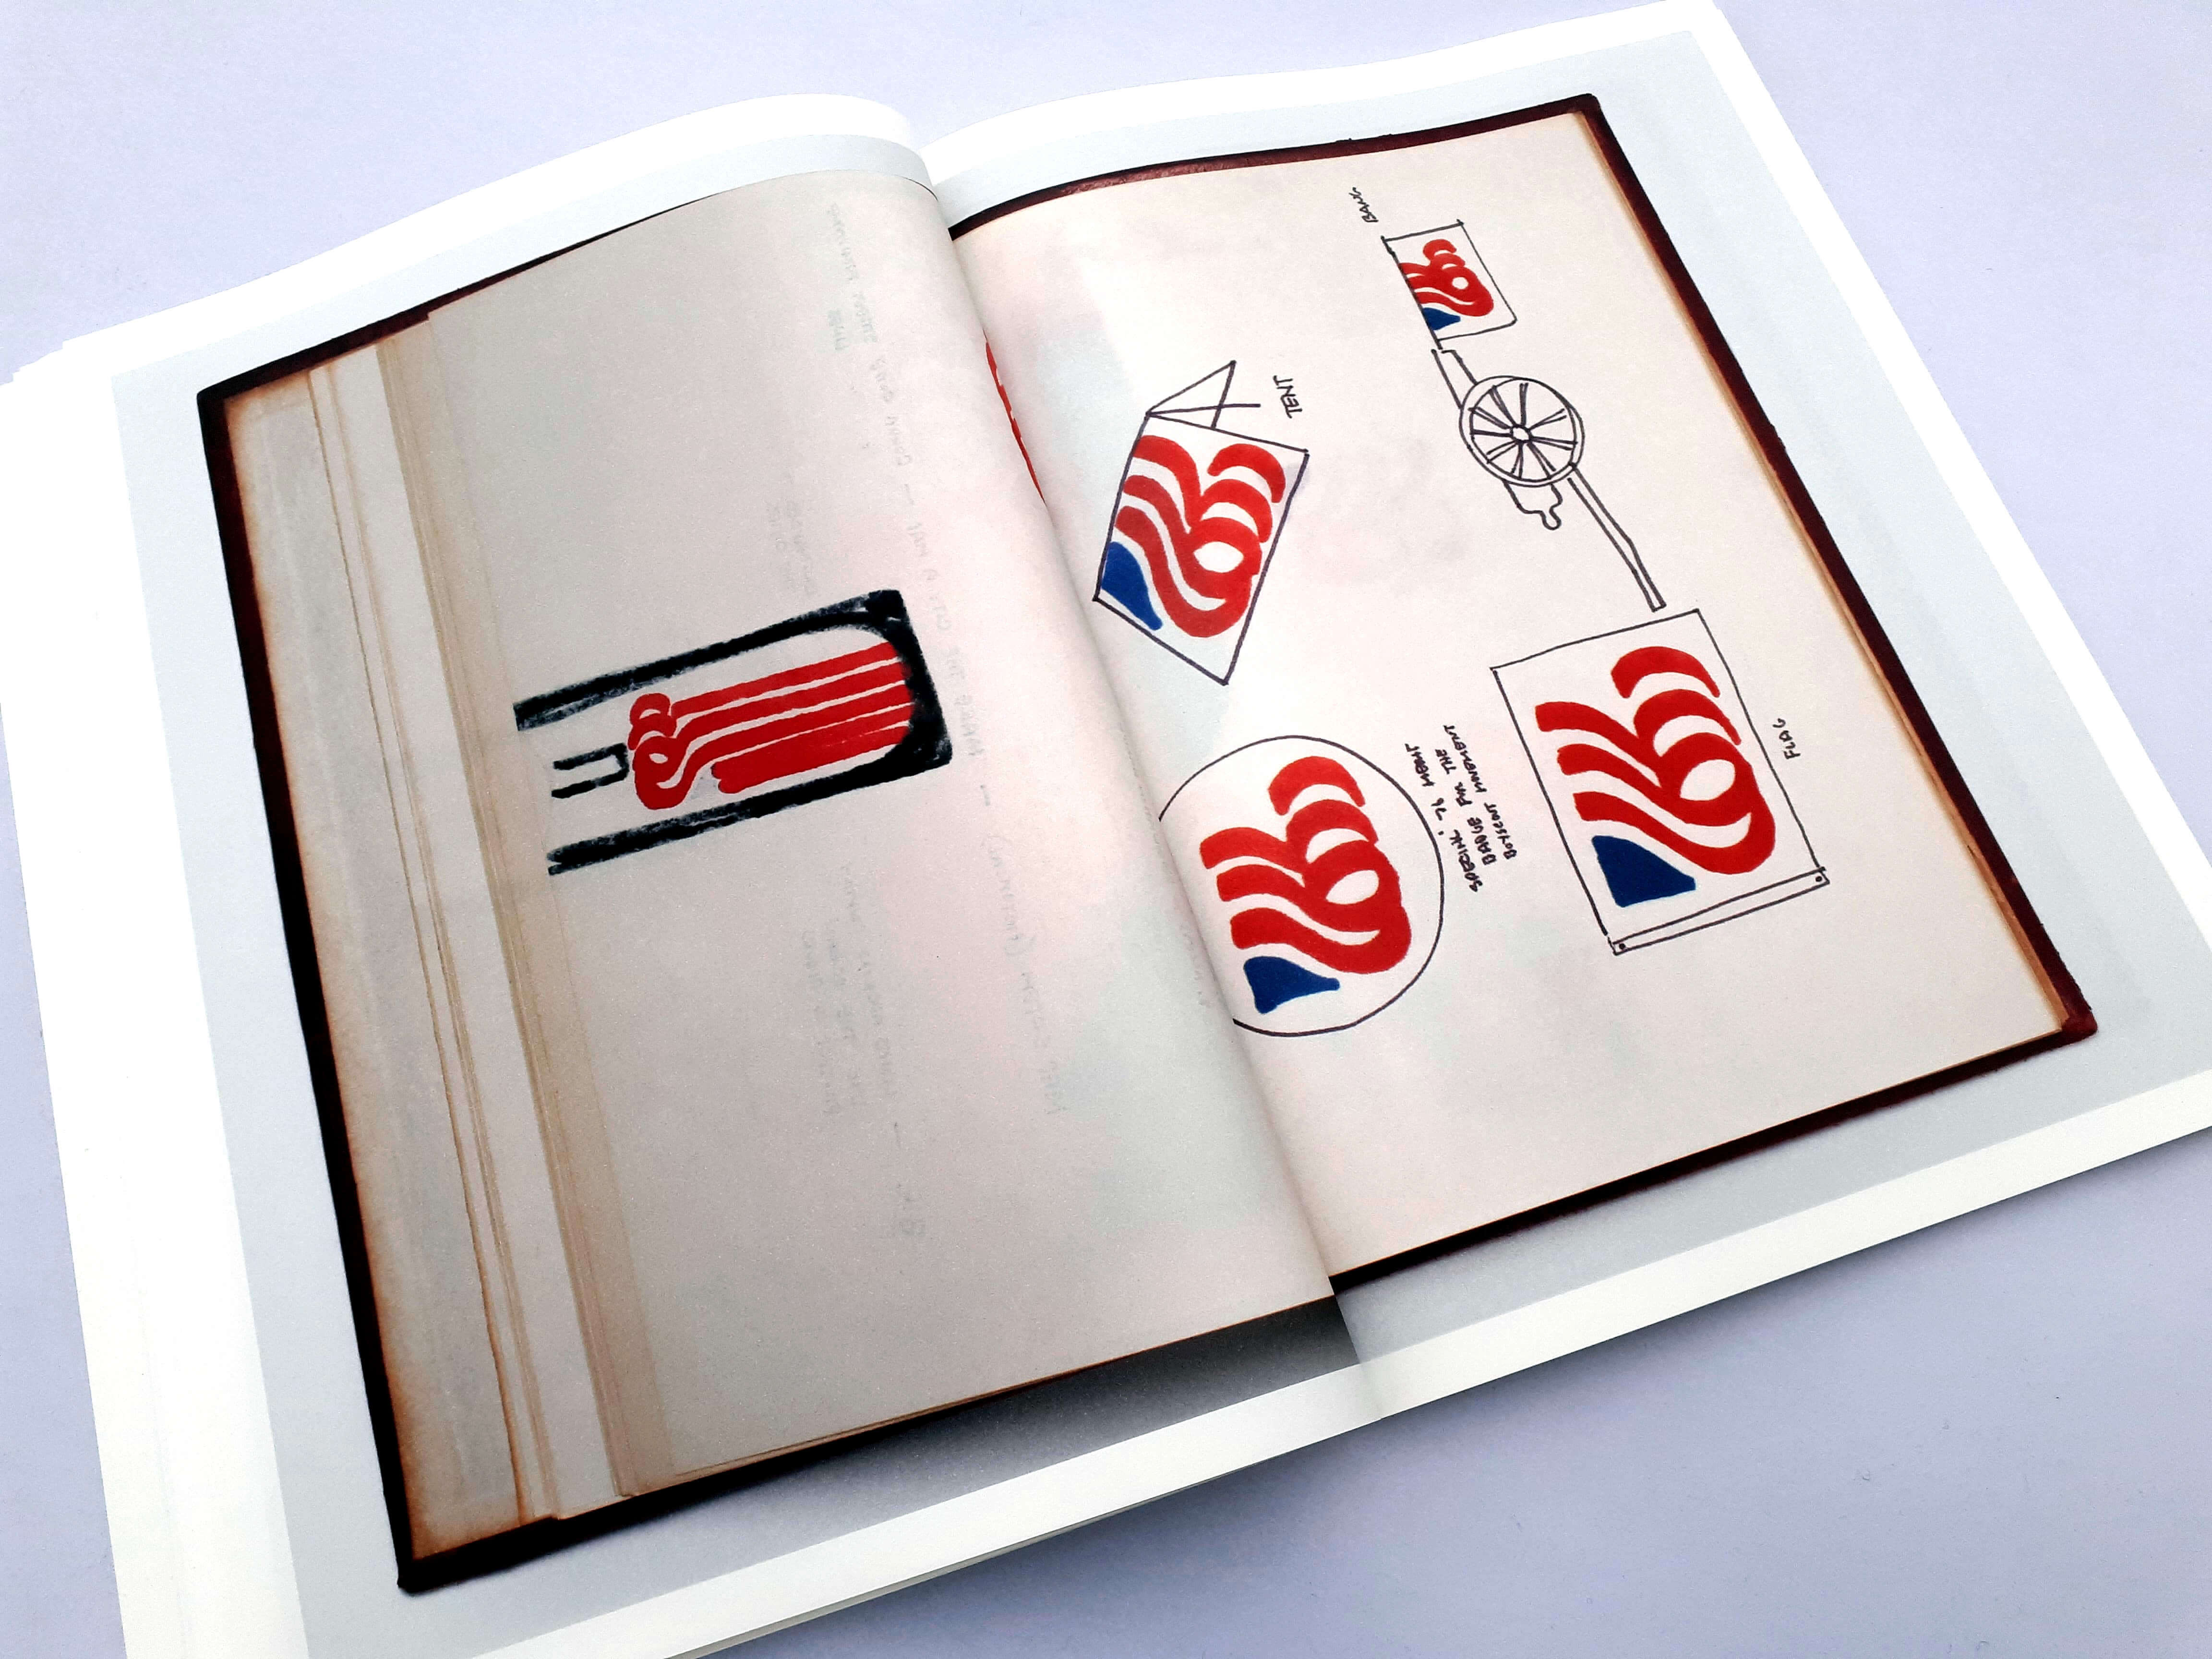 Lance Wyman - Process. A proposal for the 1976 USA Bicentennial identity by Unit Editions